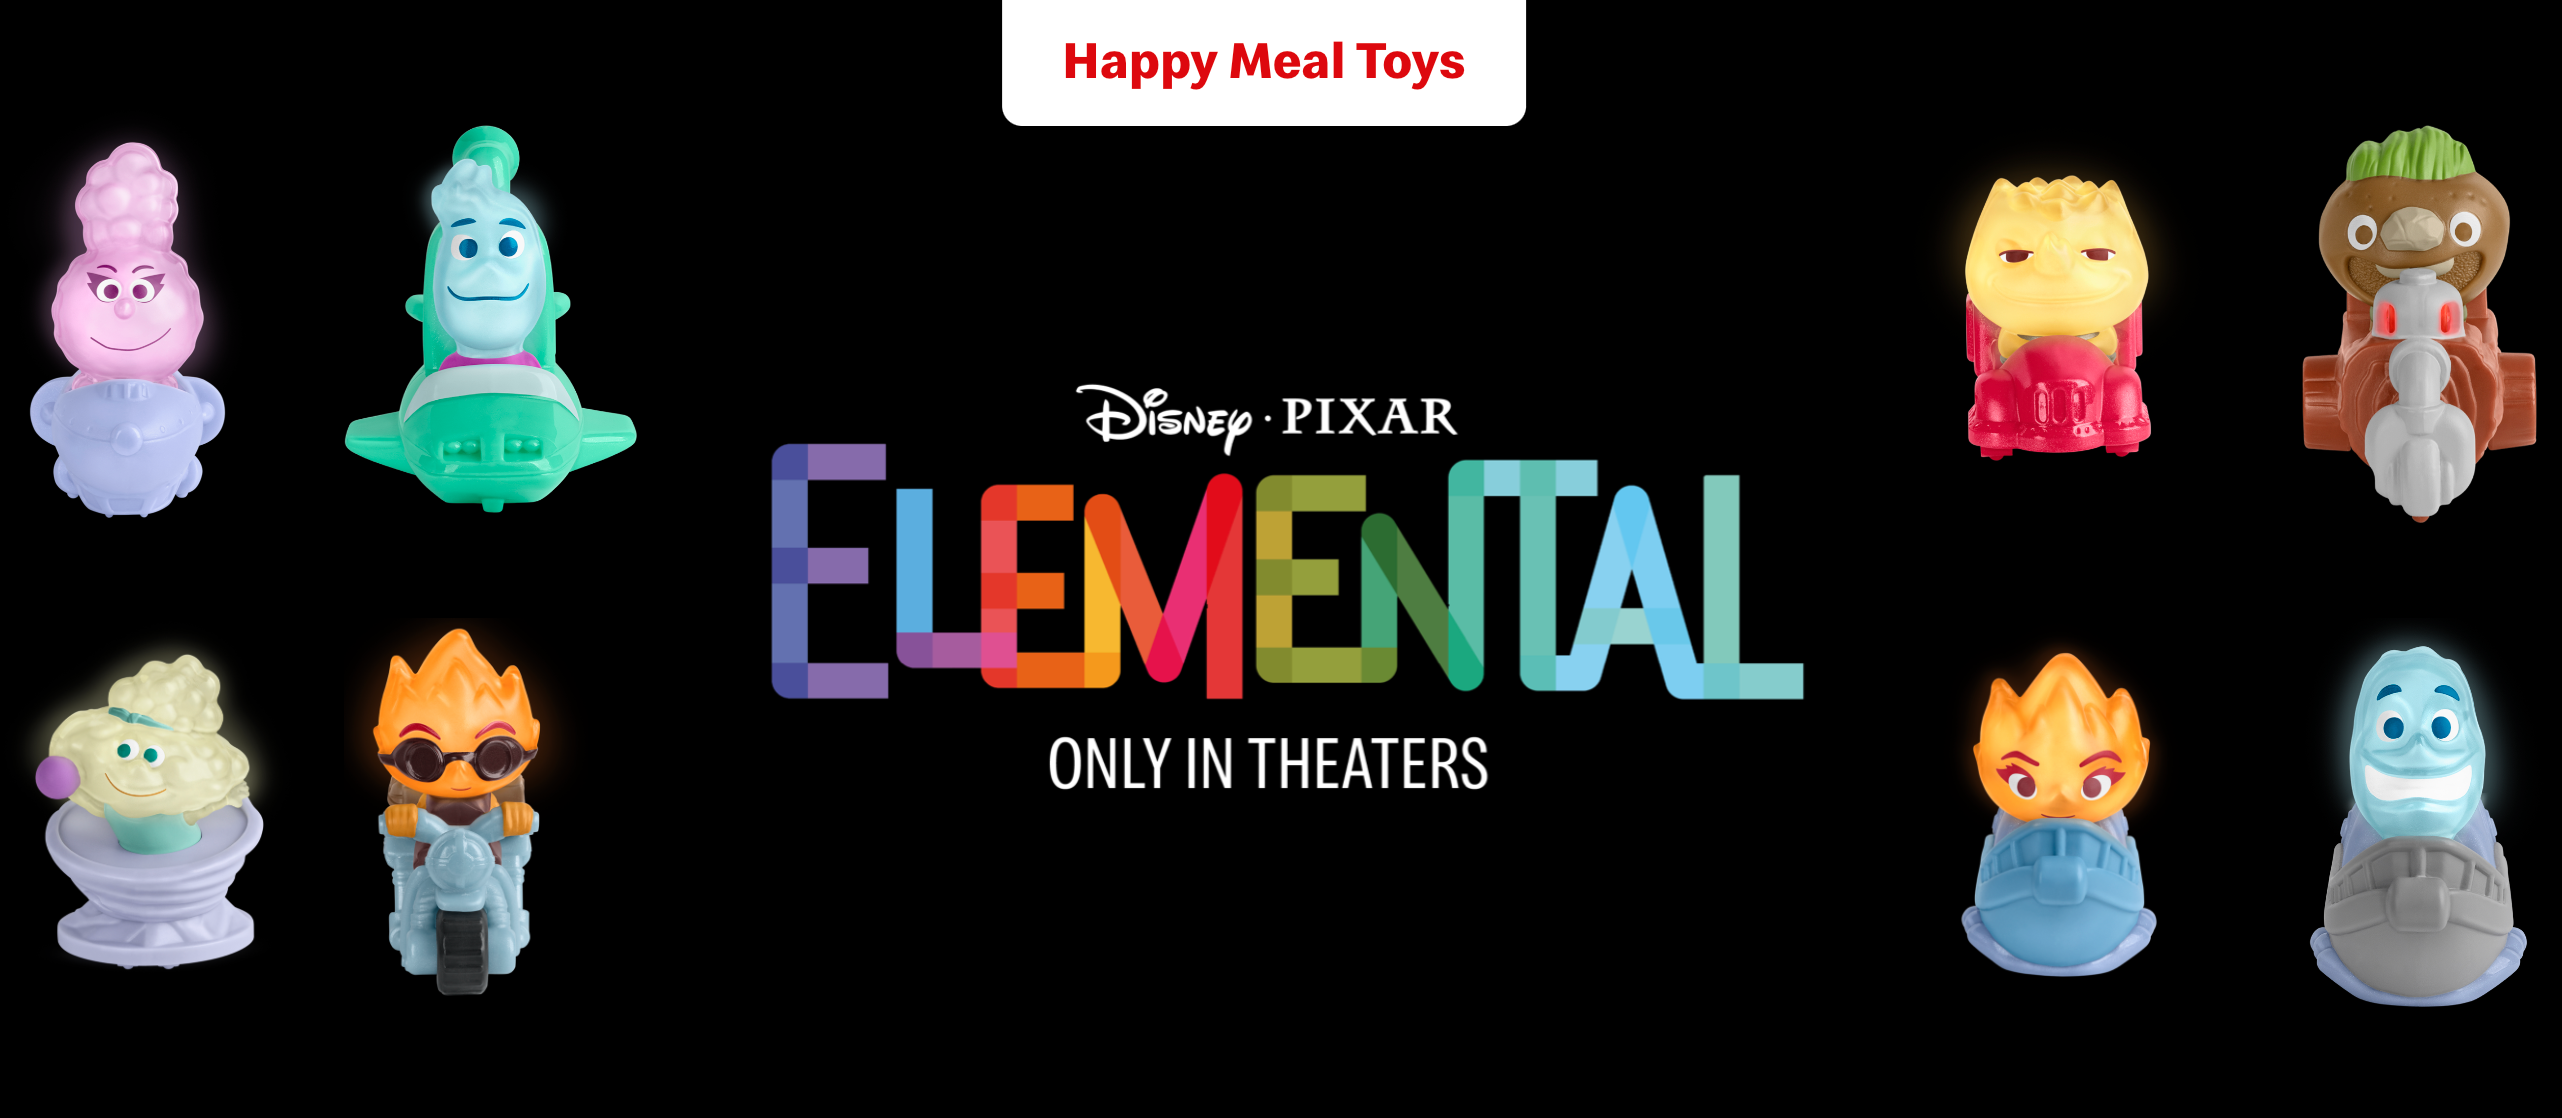 NEW Disney Happy Meal Toys Now Available at McDonald's! the disney